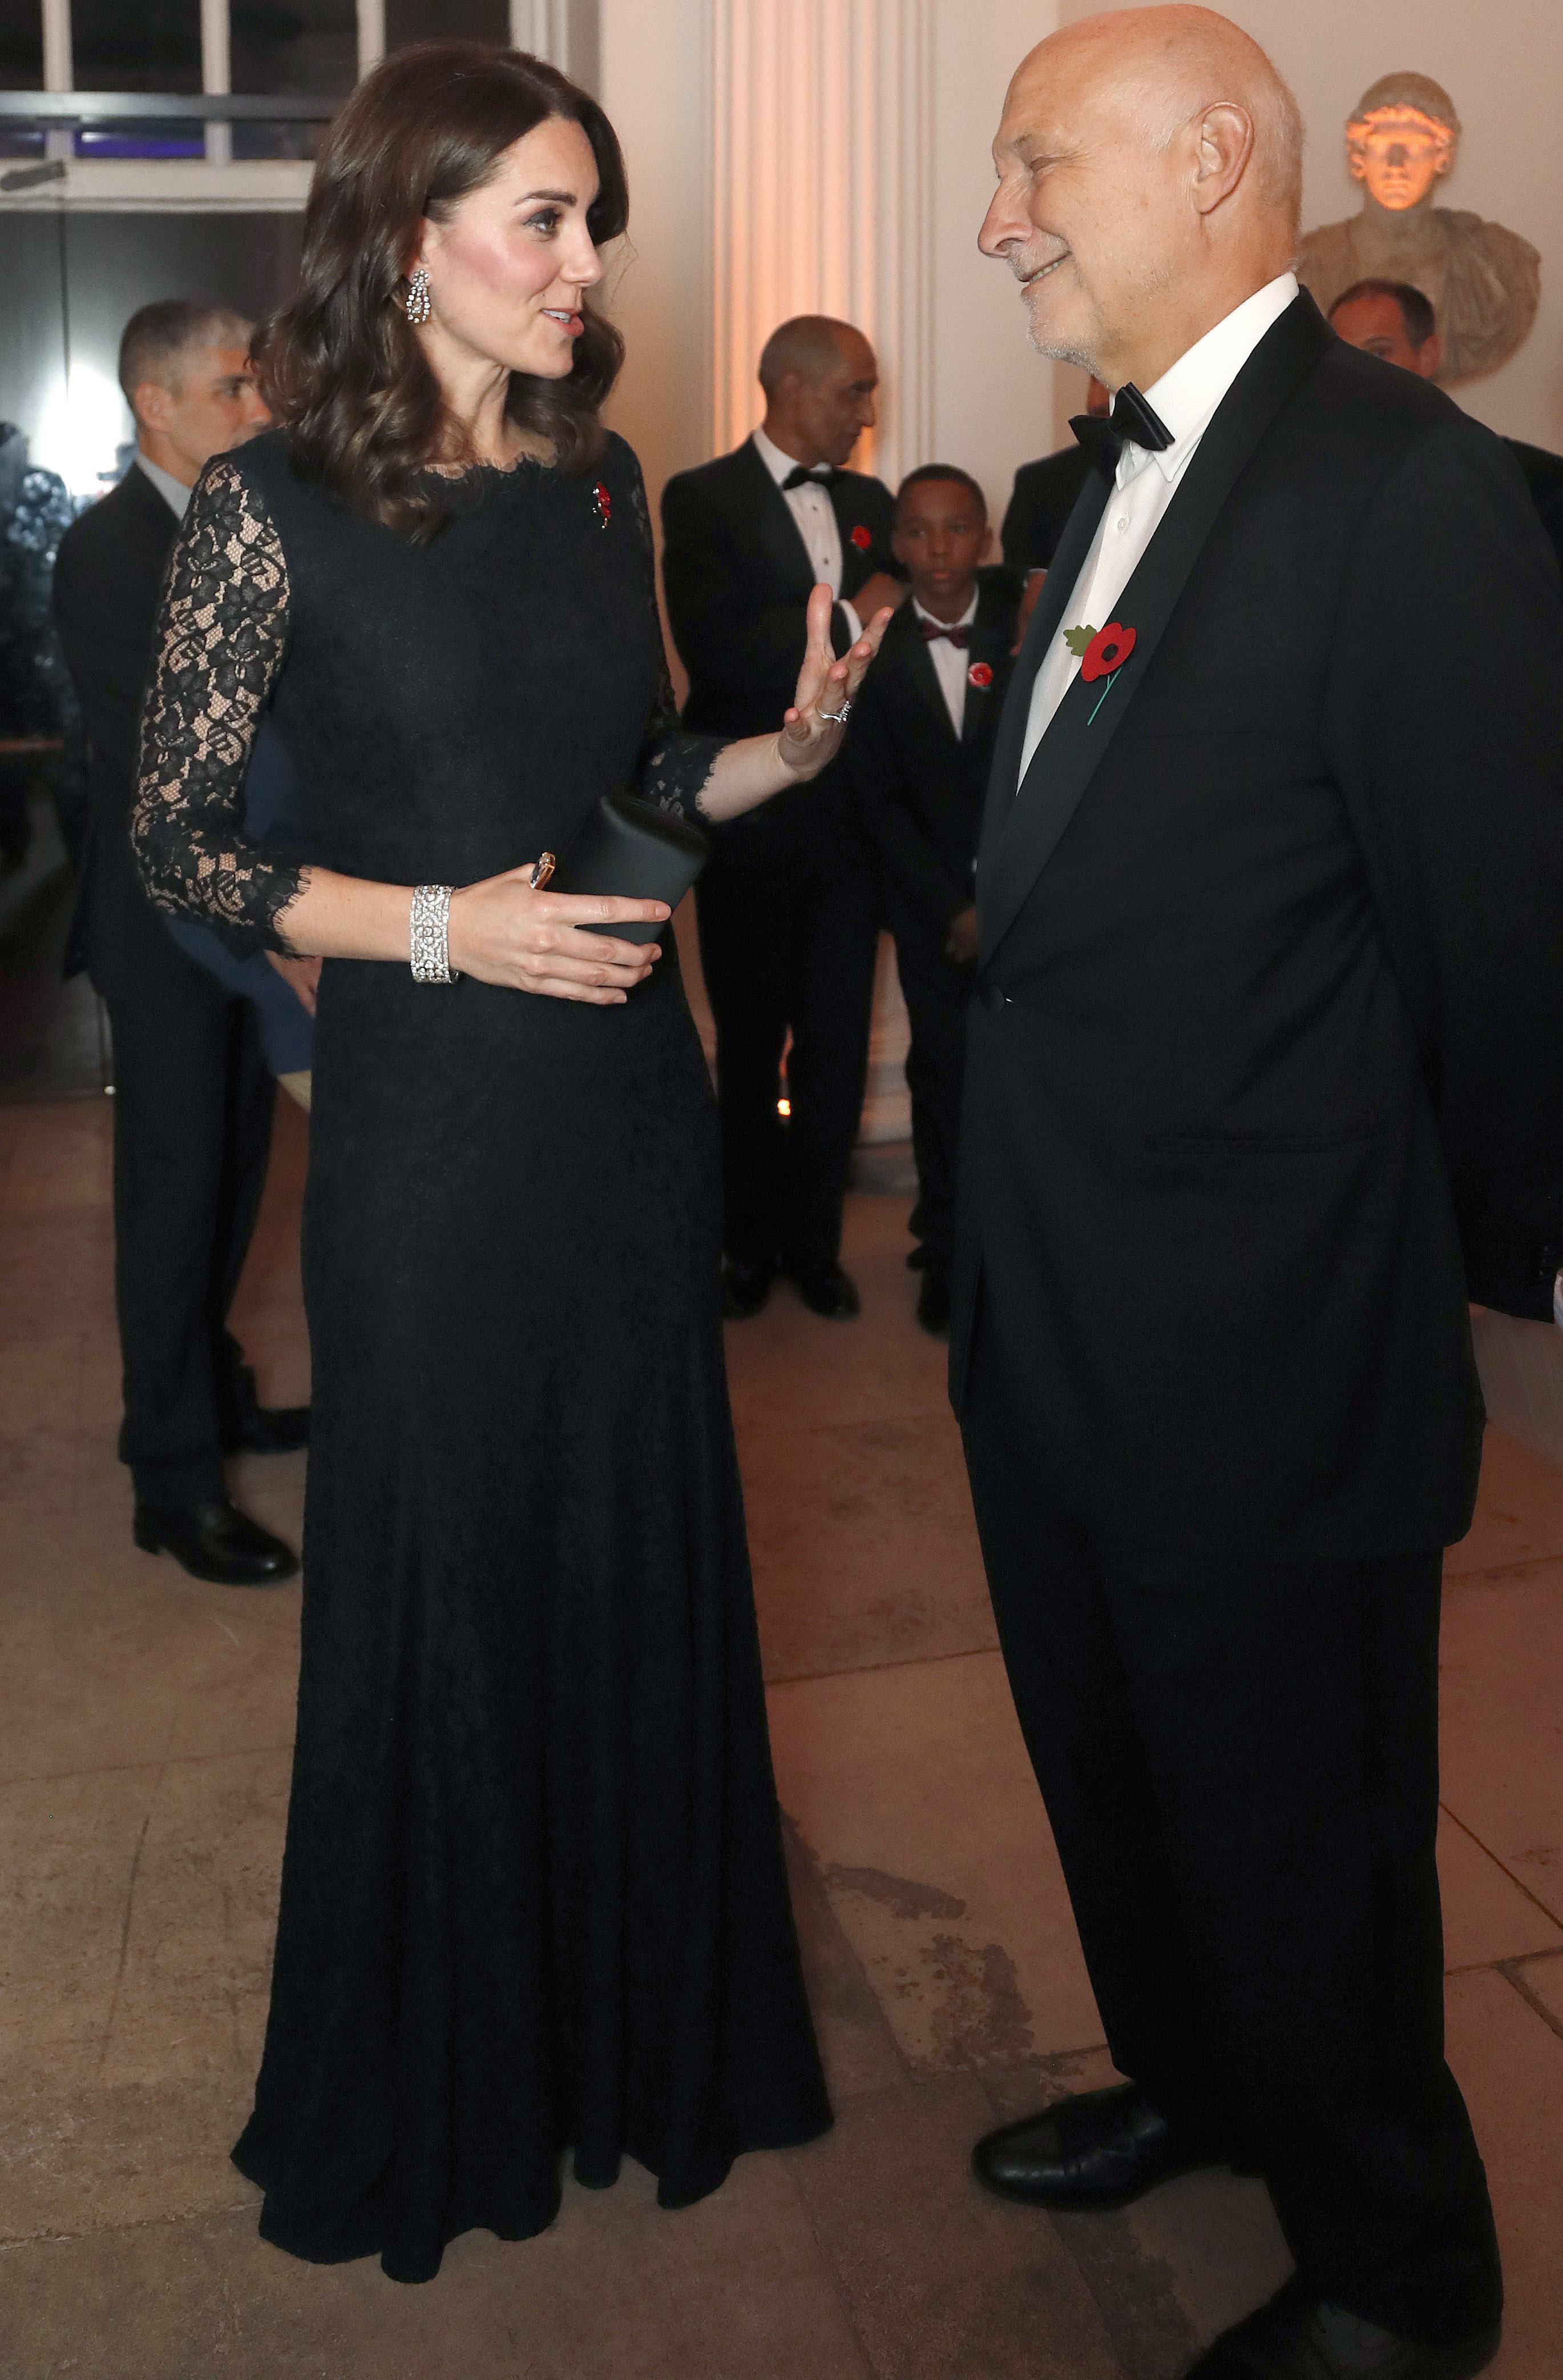 Catherine, Duchess of Cambridge speaks to Peter Fonagy, chief executive and a tutor at The Anna Freud Centre at the 2017 Gala Dinner for The Anna Freud National Centre for Children and Families (AFNCCF) at Kensington Palace on 7 November 2017.